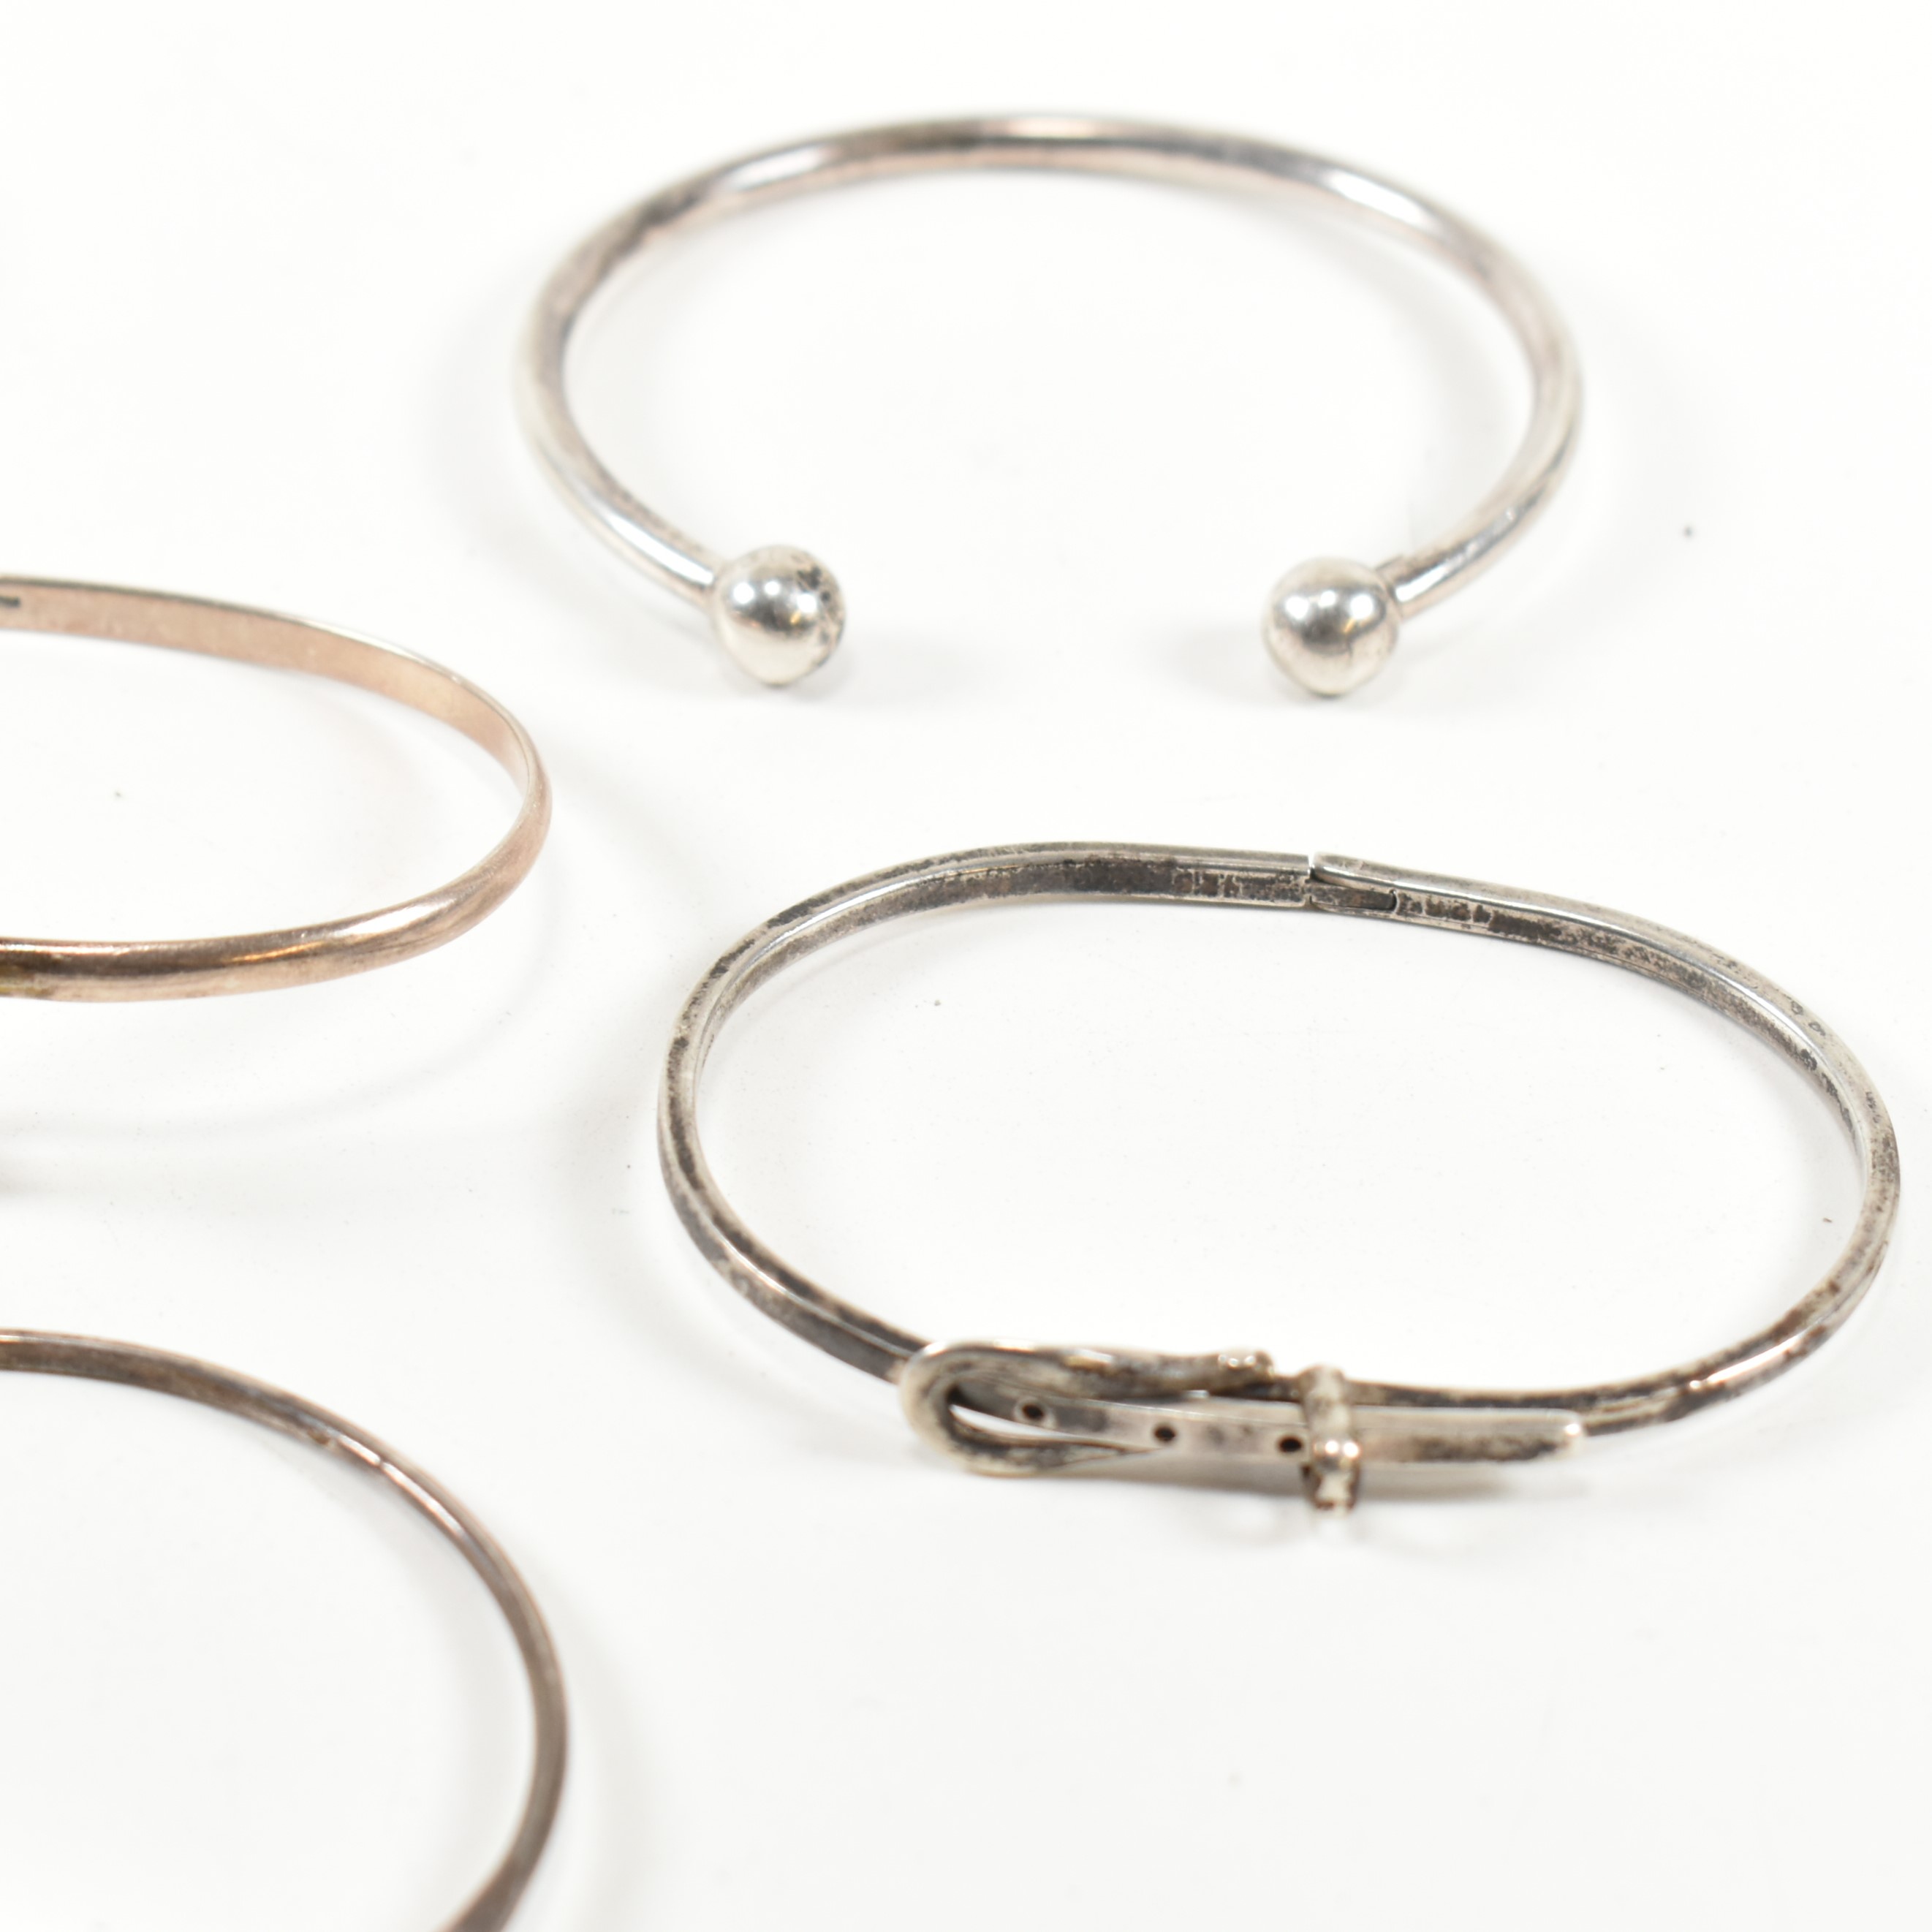 COLLECTION OF SILVER BANGLES & BRACELETS - Image 6 of 6